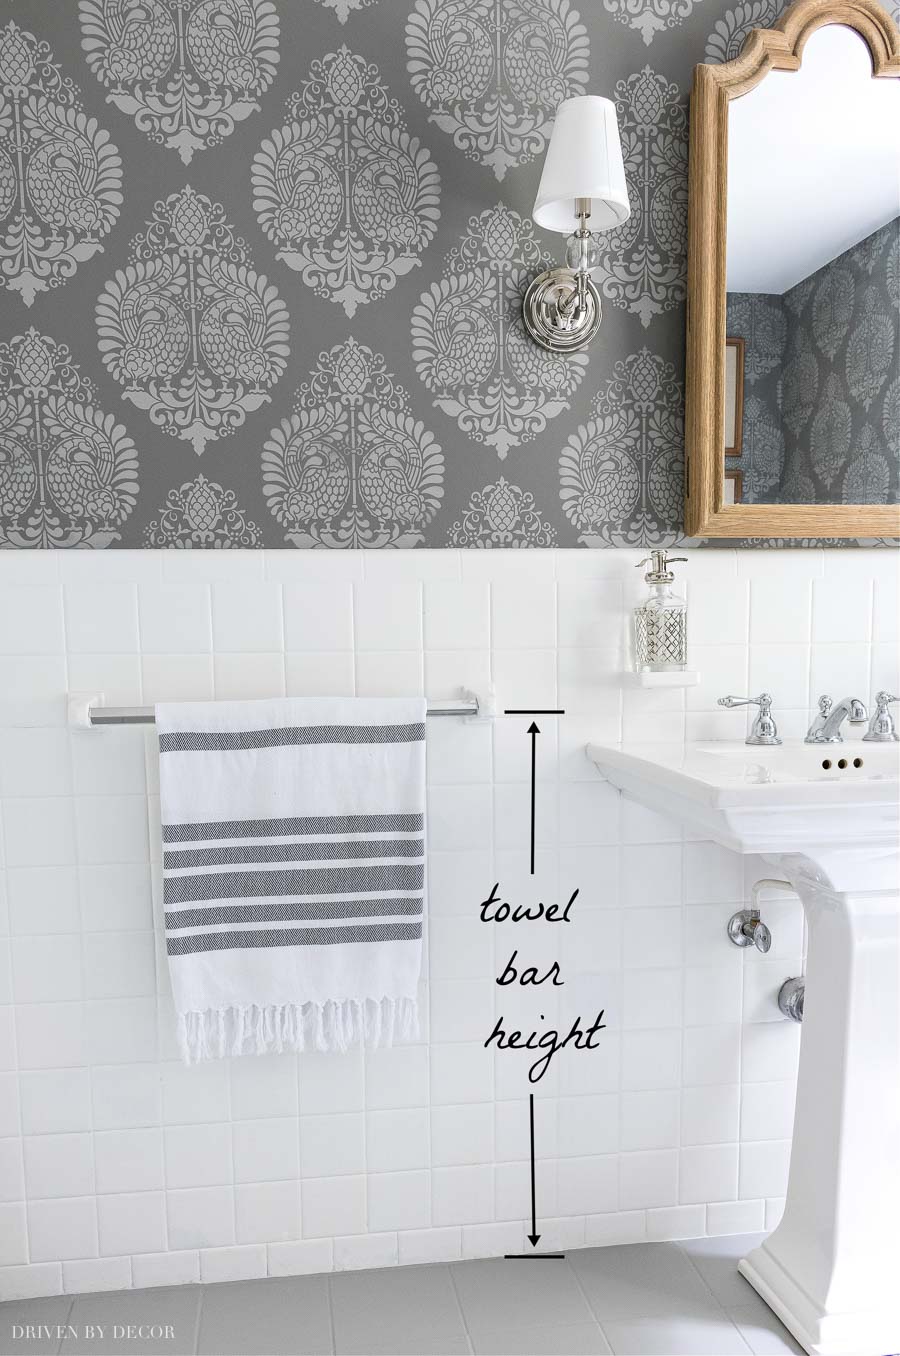 Helpful info on towel bar height and other bathroom measurements!